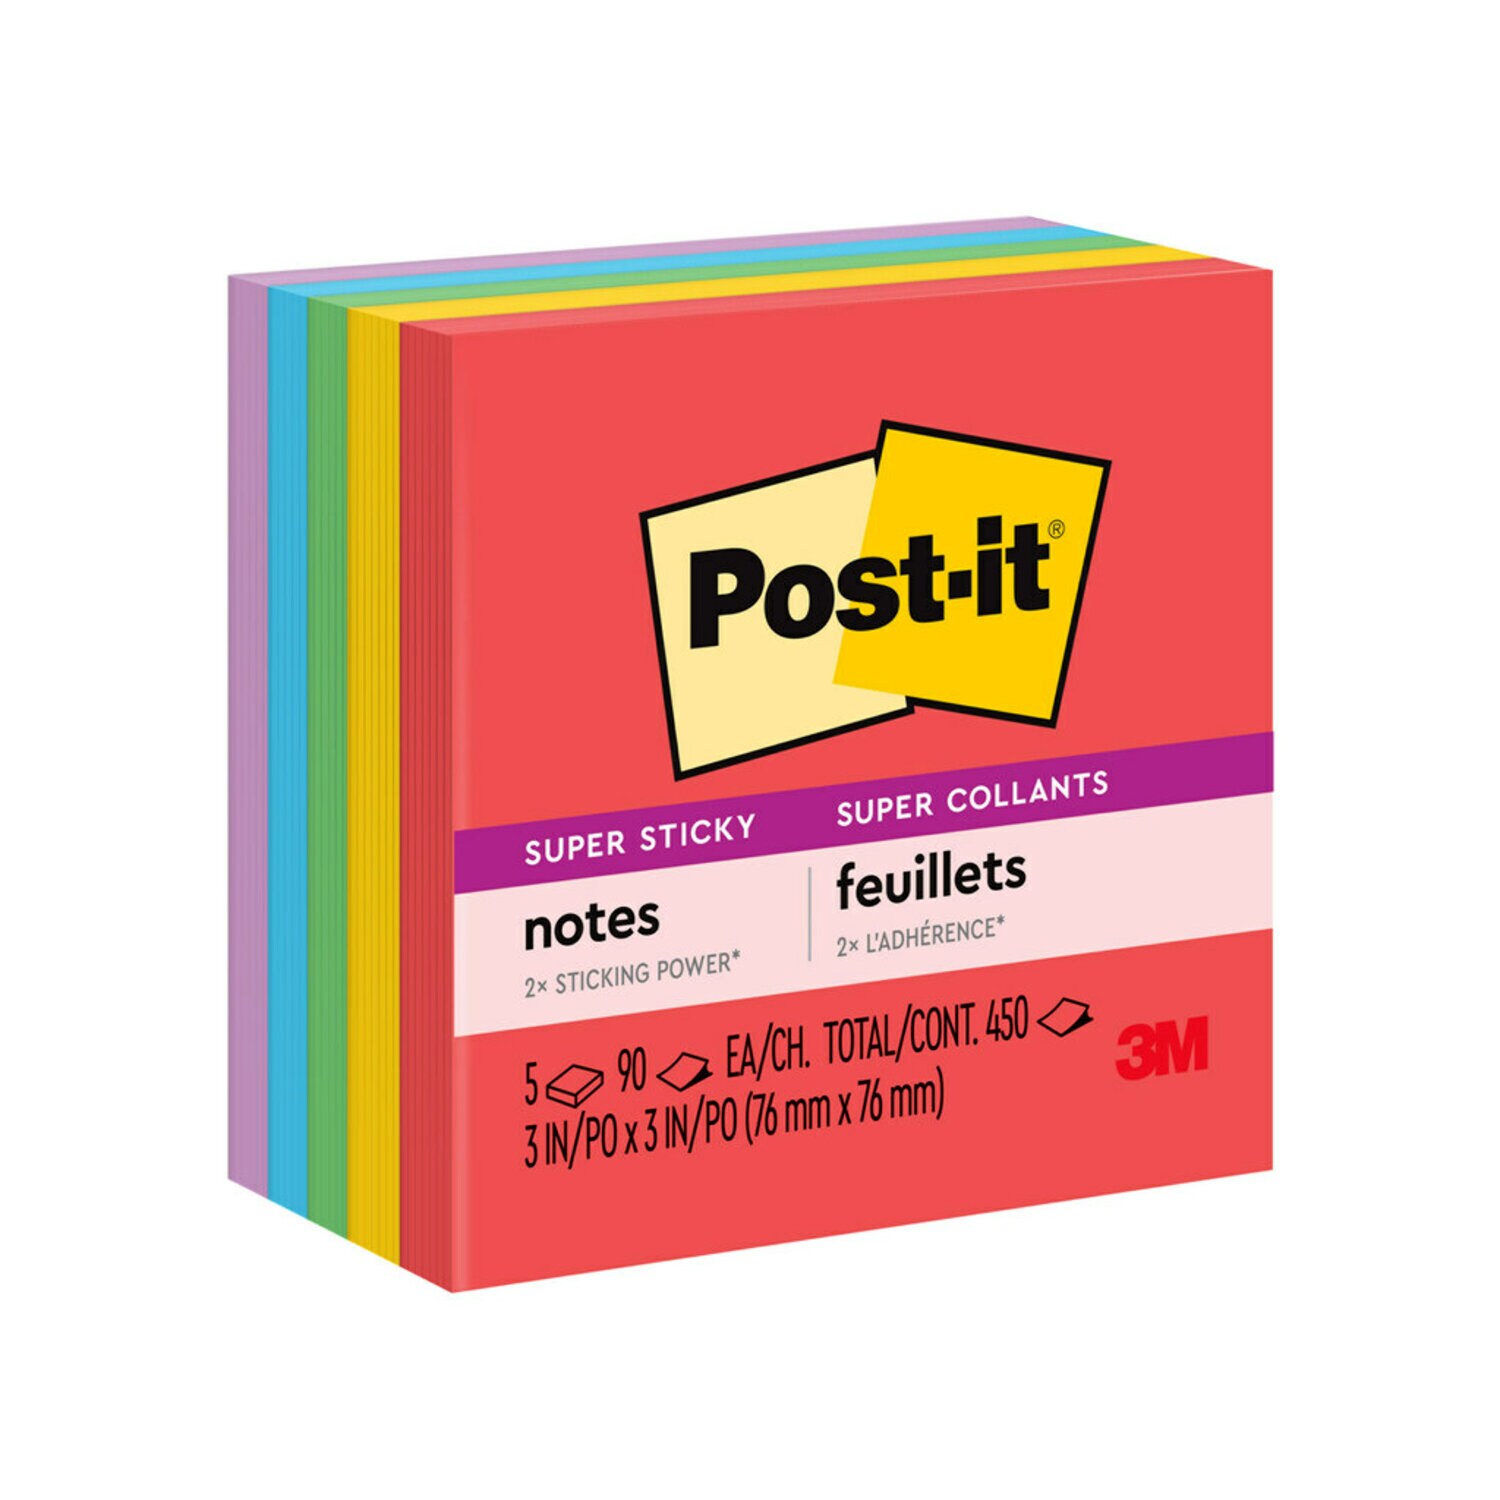 7100050239 - Post-it Super Sticky Notes 654-5SSAN, 3 in x 3 in (76 mm x 76 mm), Playful Primaries Collection